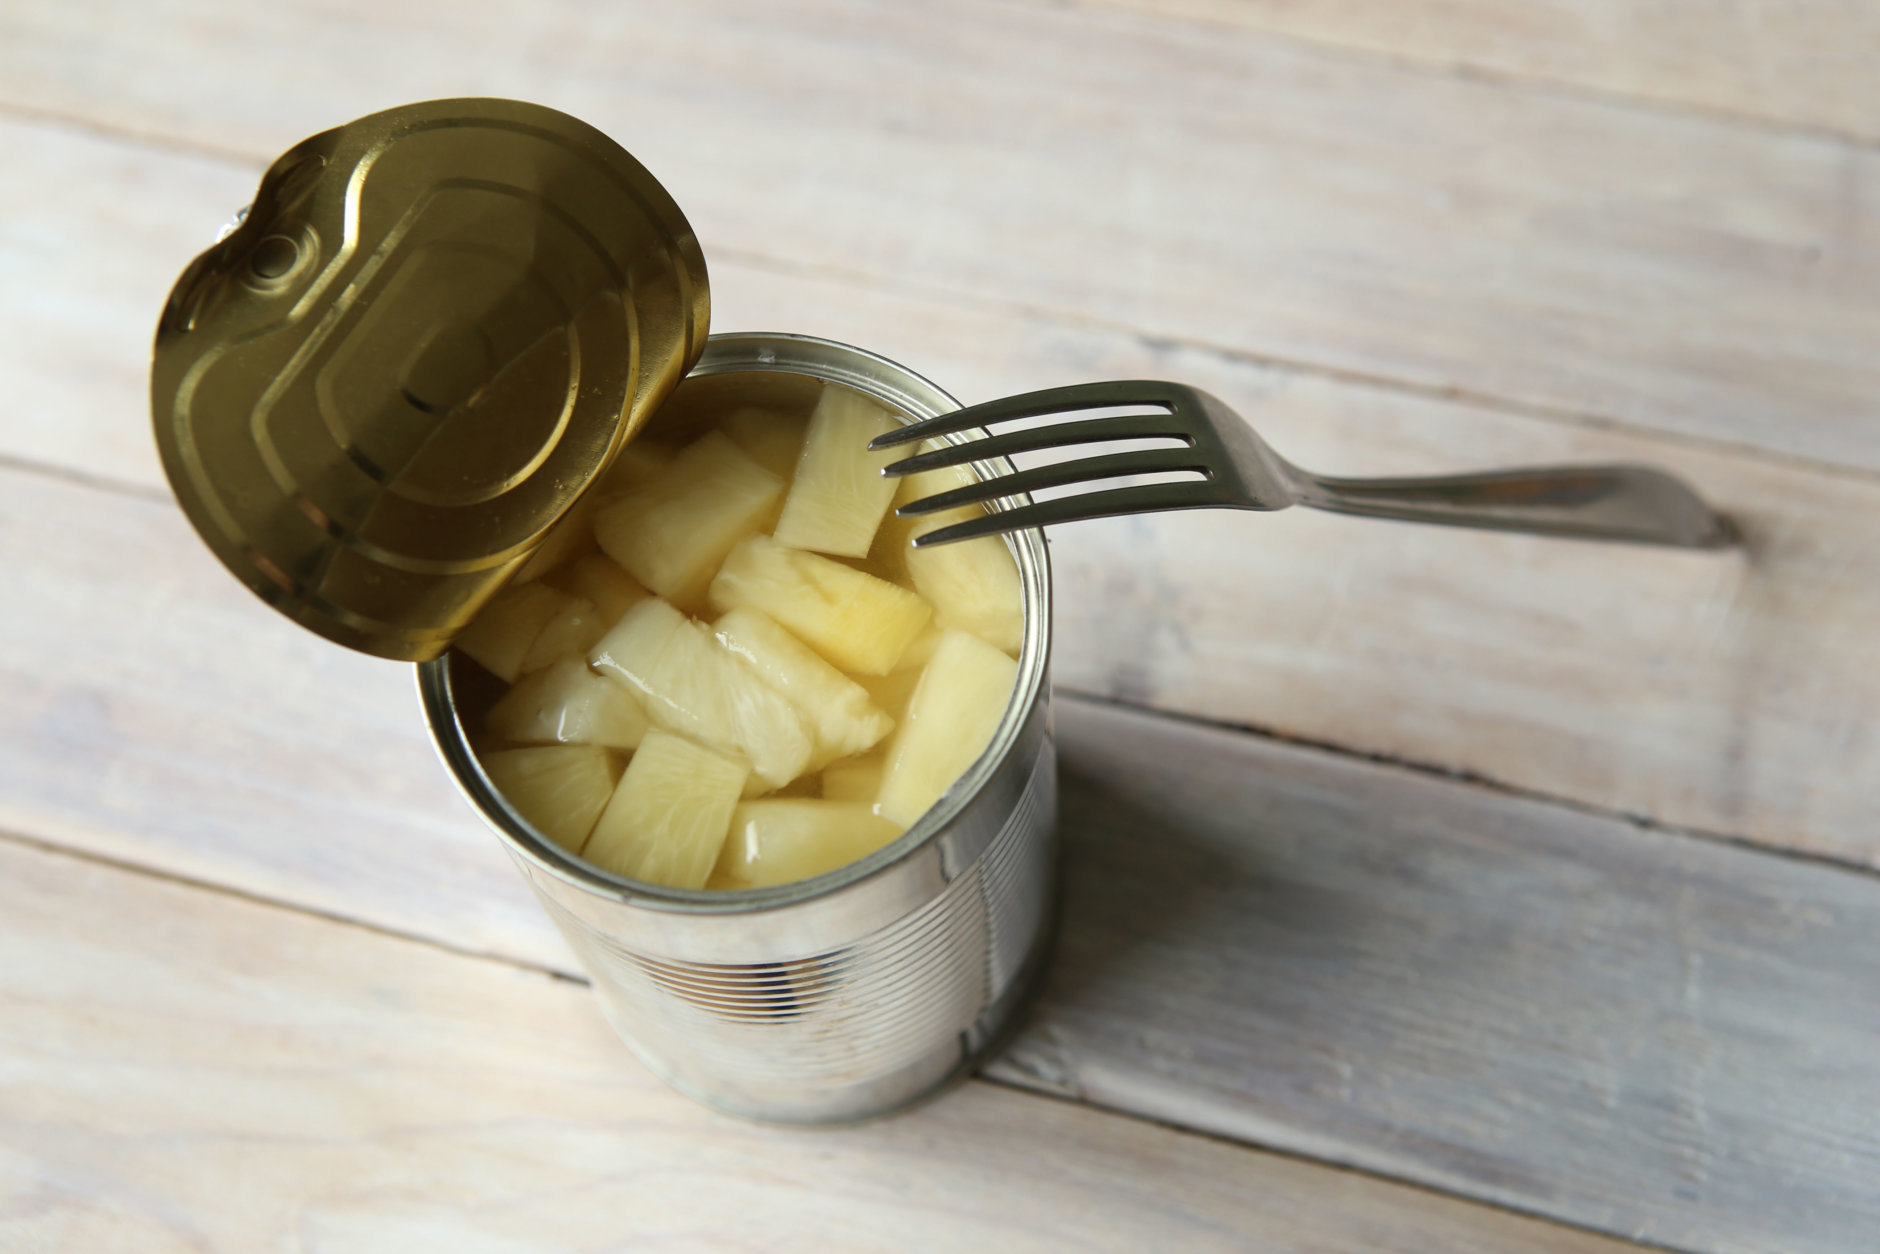 Canned pineapple in can with fork on wooden table.